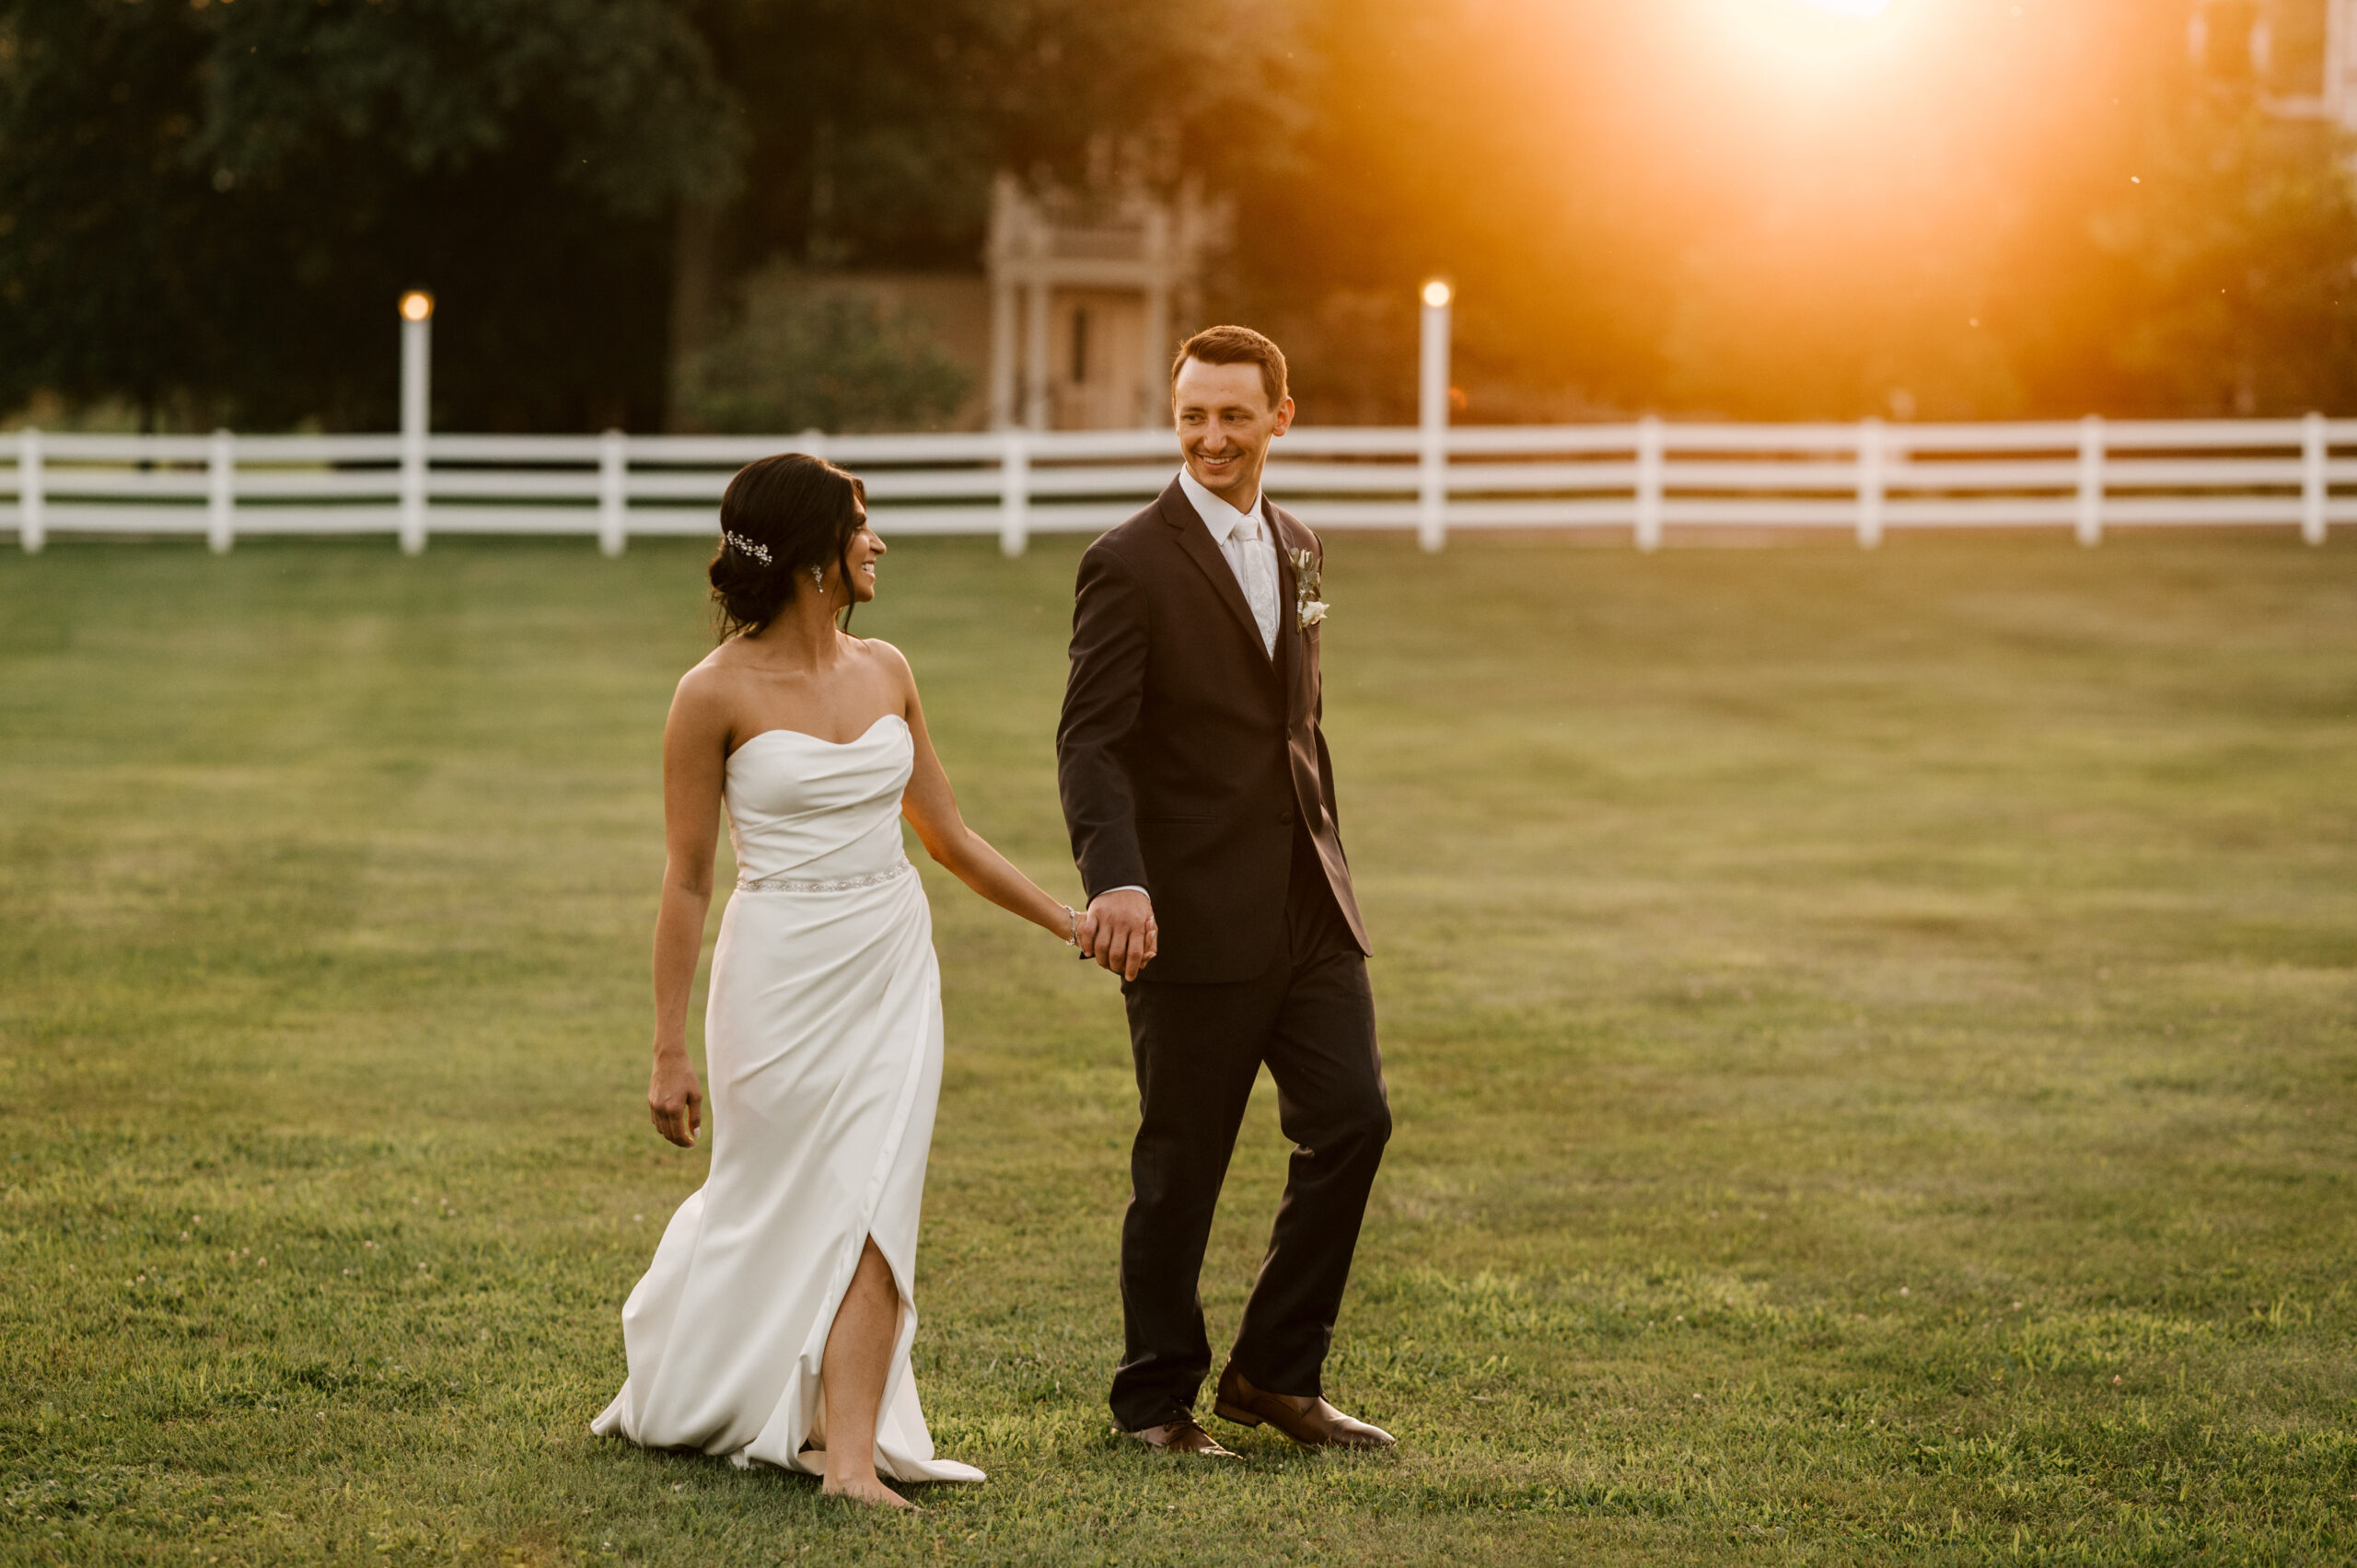 Bride and groom bask in the glow of sunset at The Ryland Inn in whitehouse station New Jersey on their wedding day